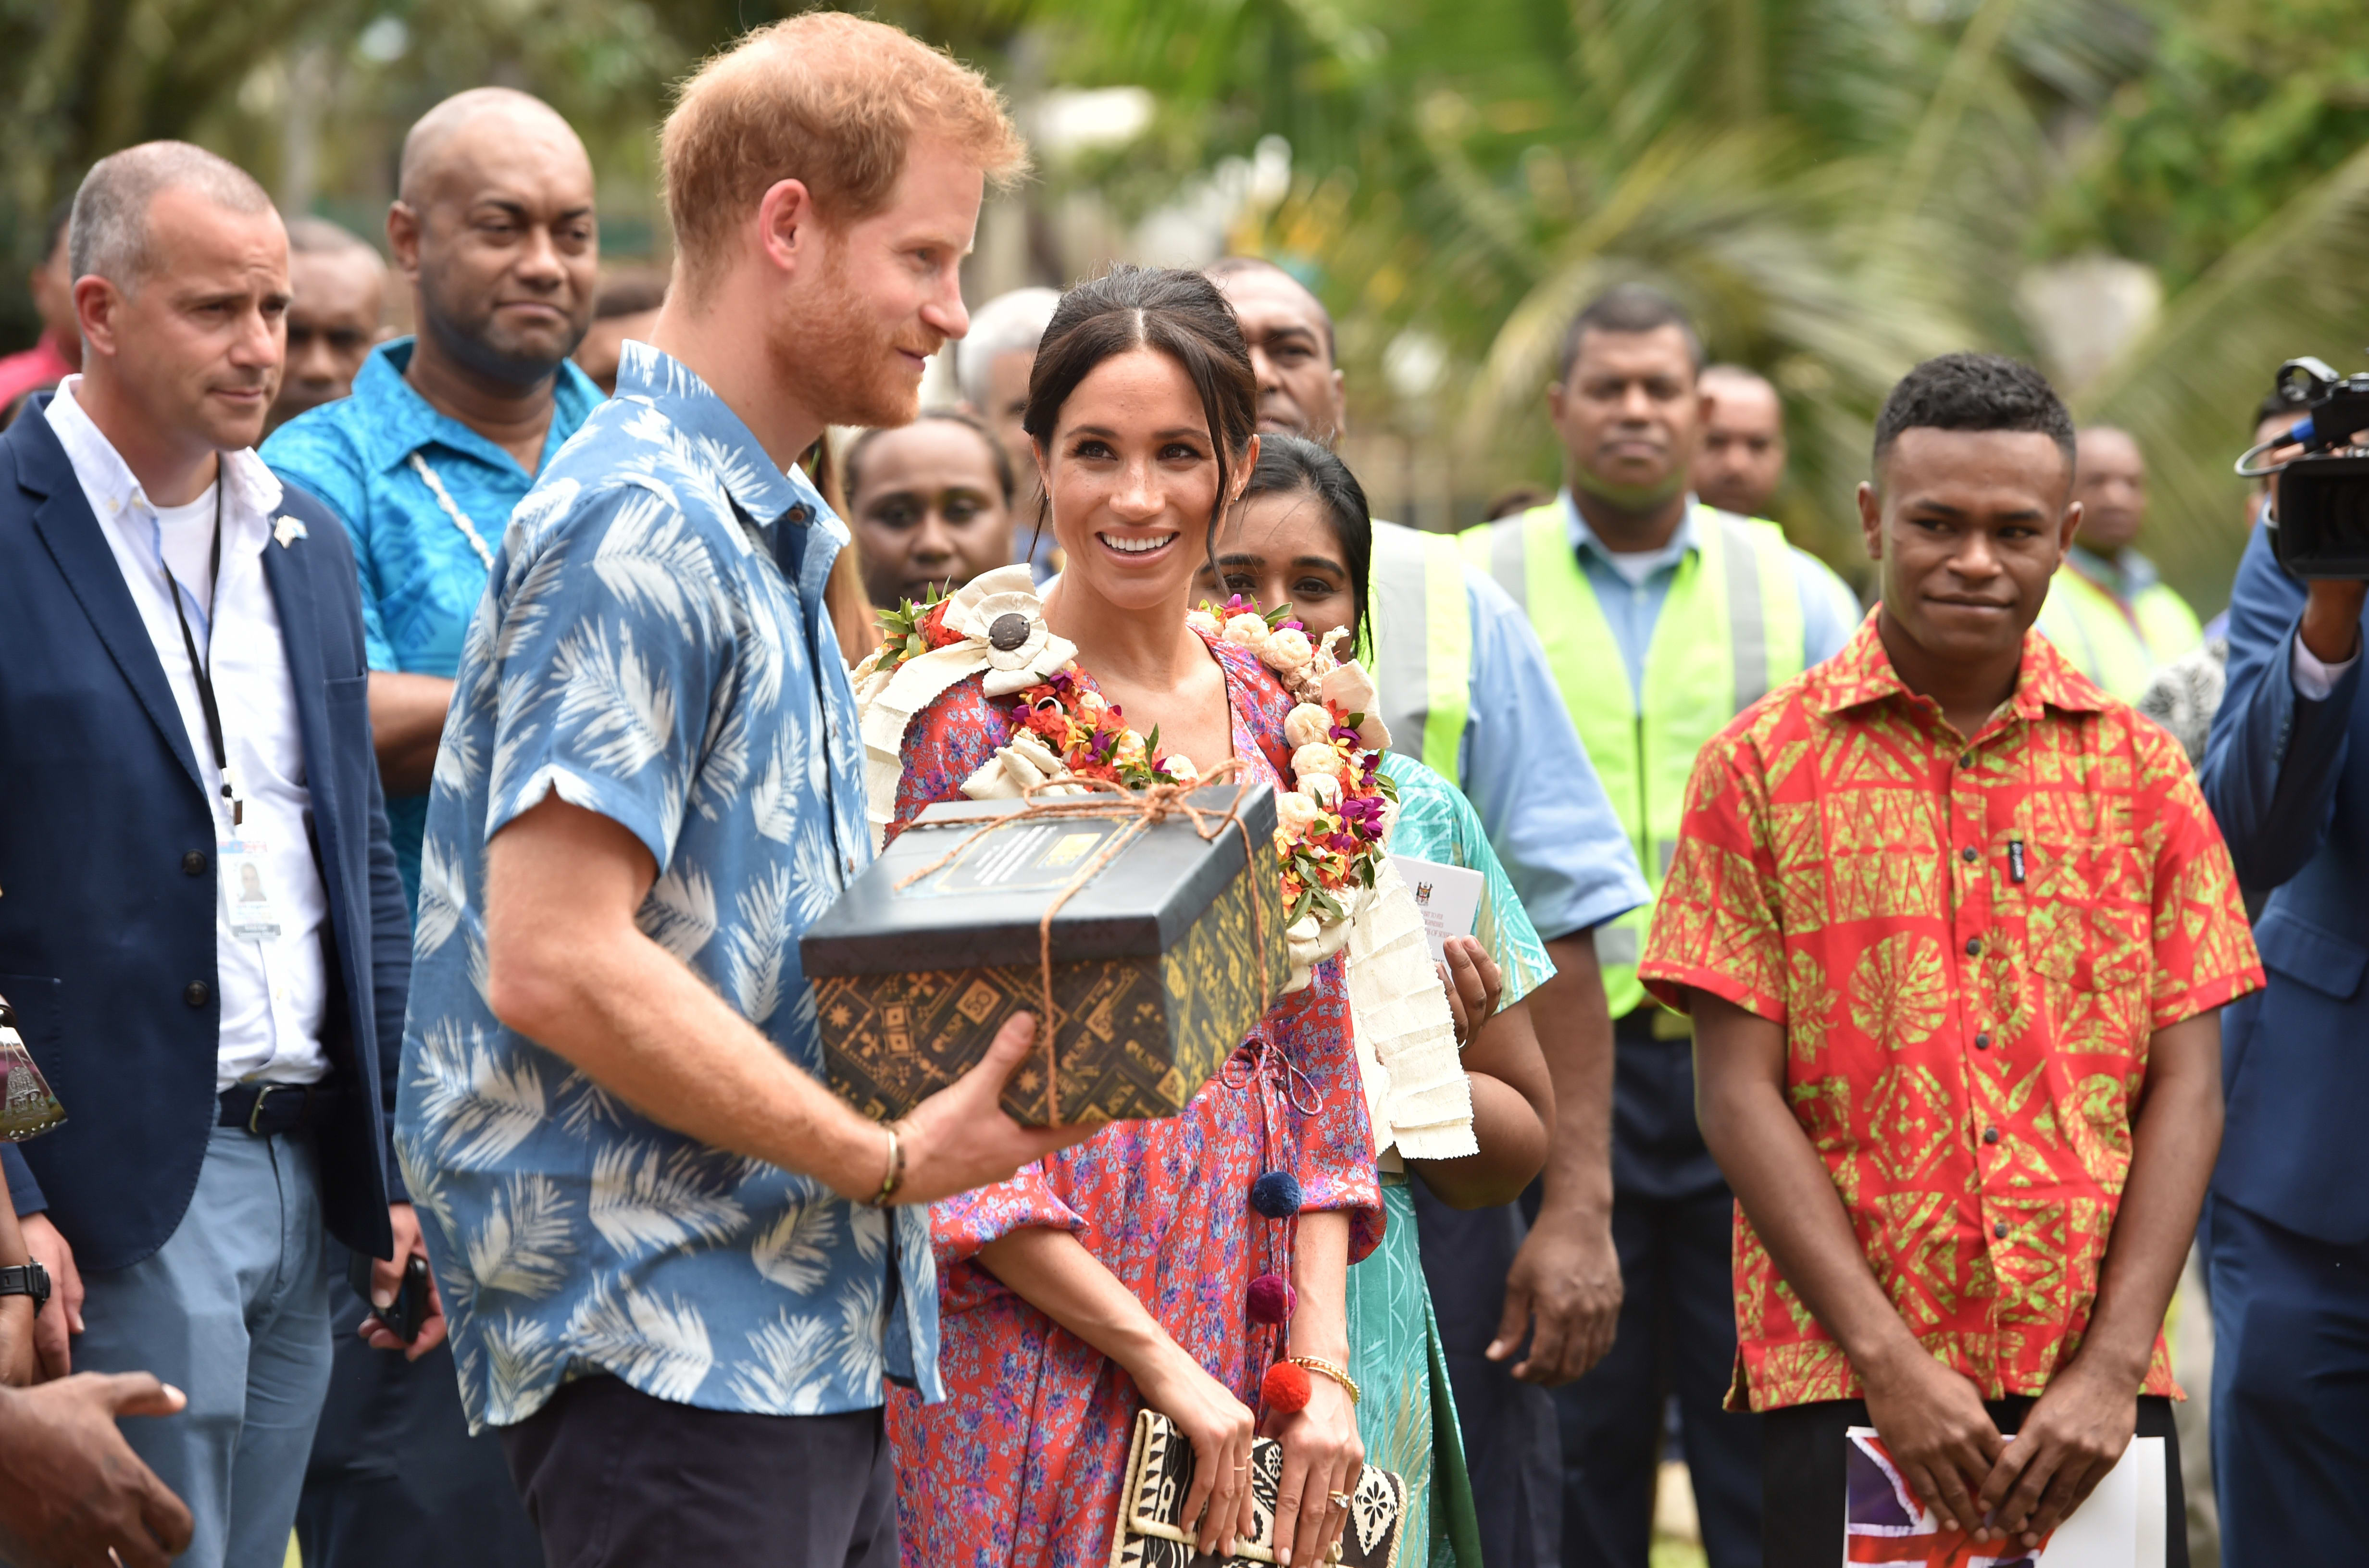 Britain's Prince Harry and his wife Meghan, Duchess of Sussex receive a gift from the University of the South Pacific in Suva.